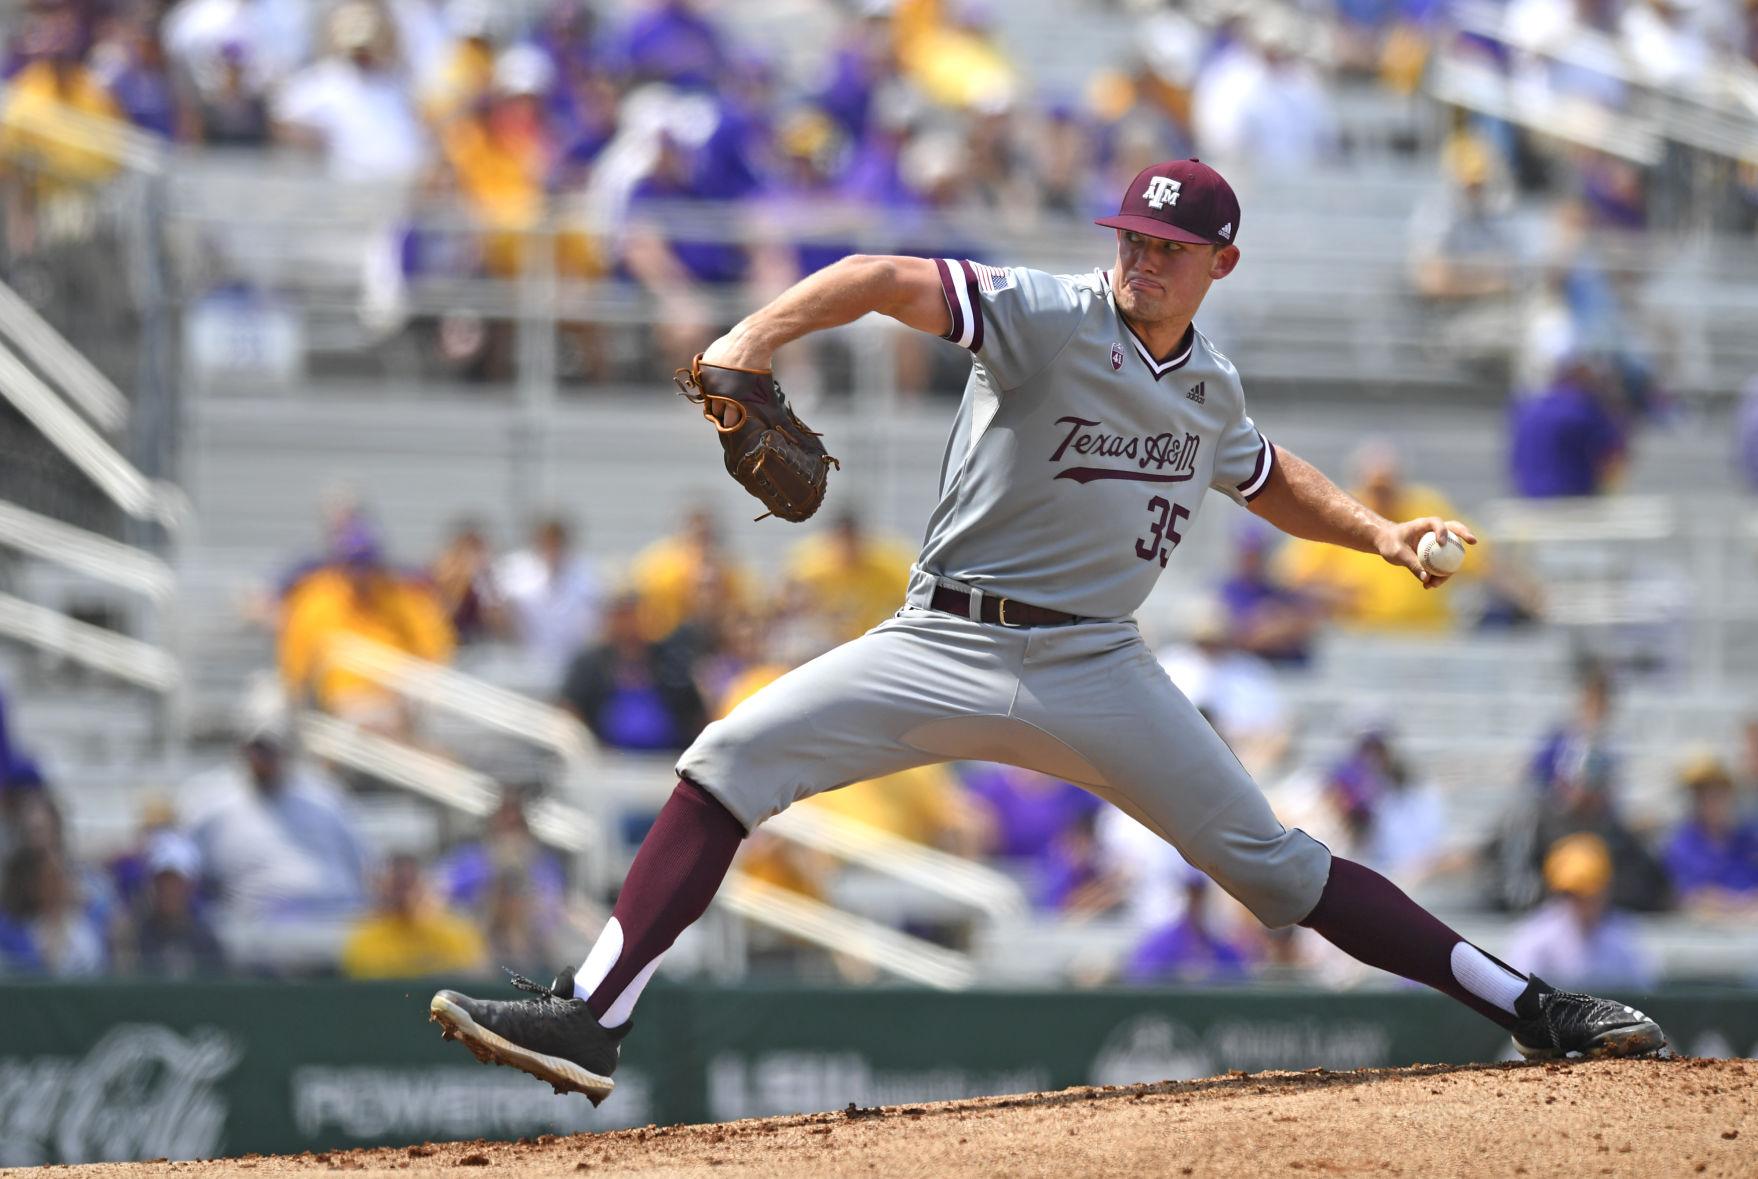 SEC baseball 2020 preview Breaking down the top pitchers and position